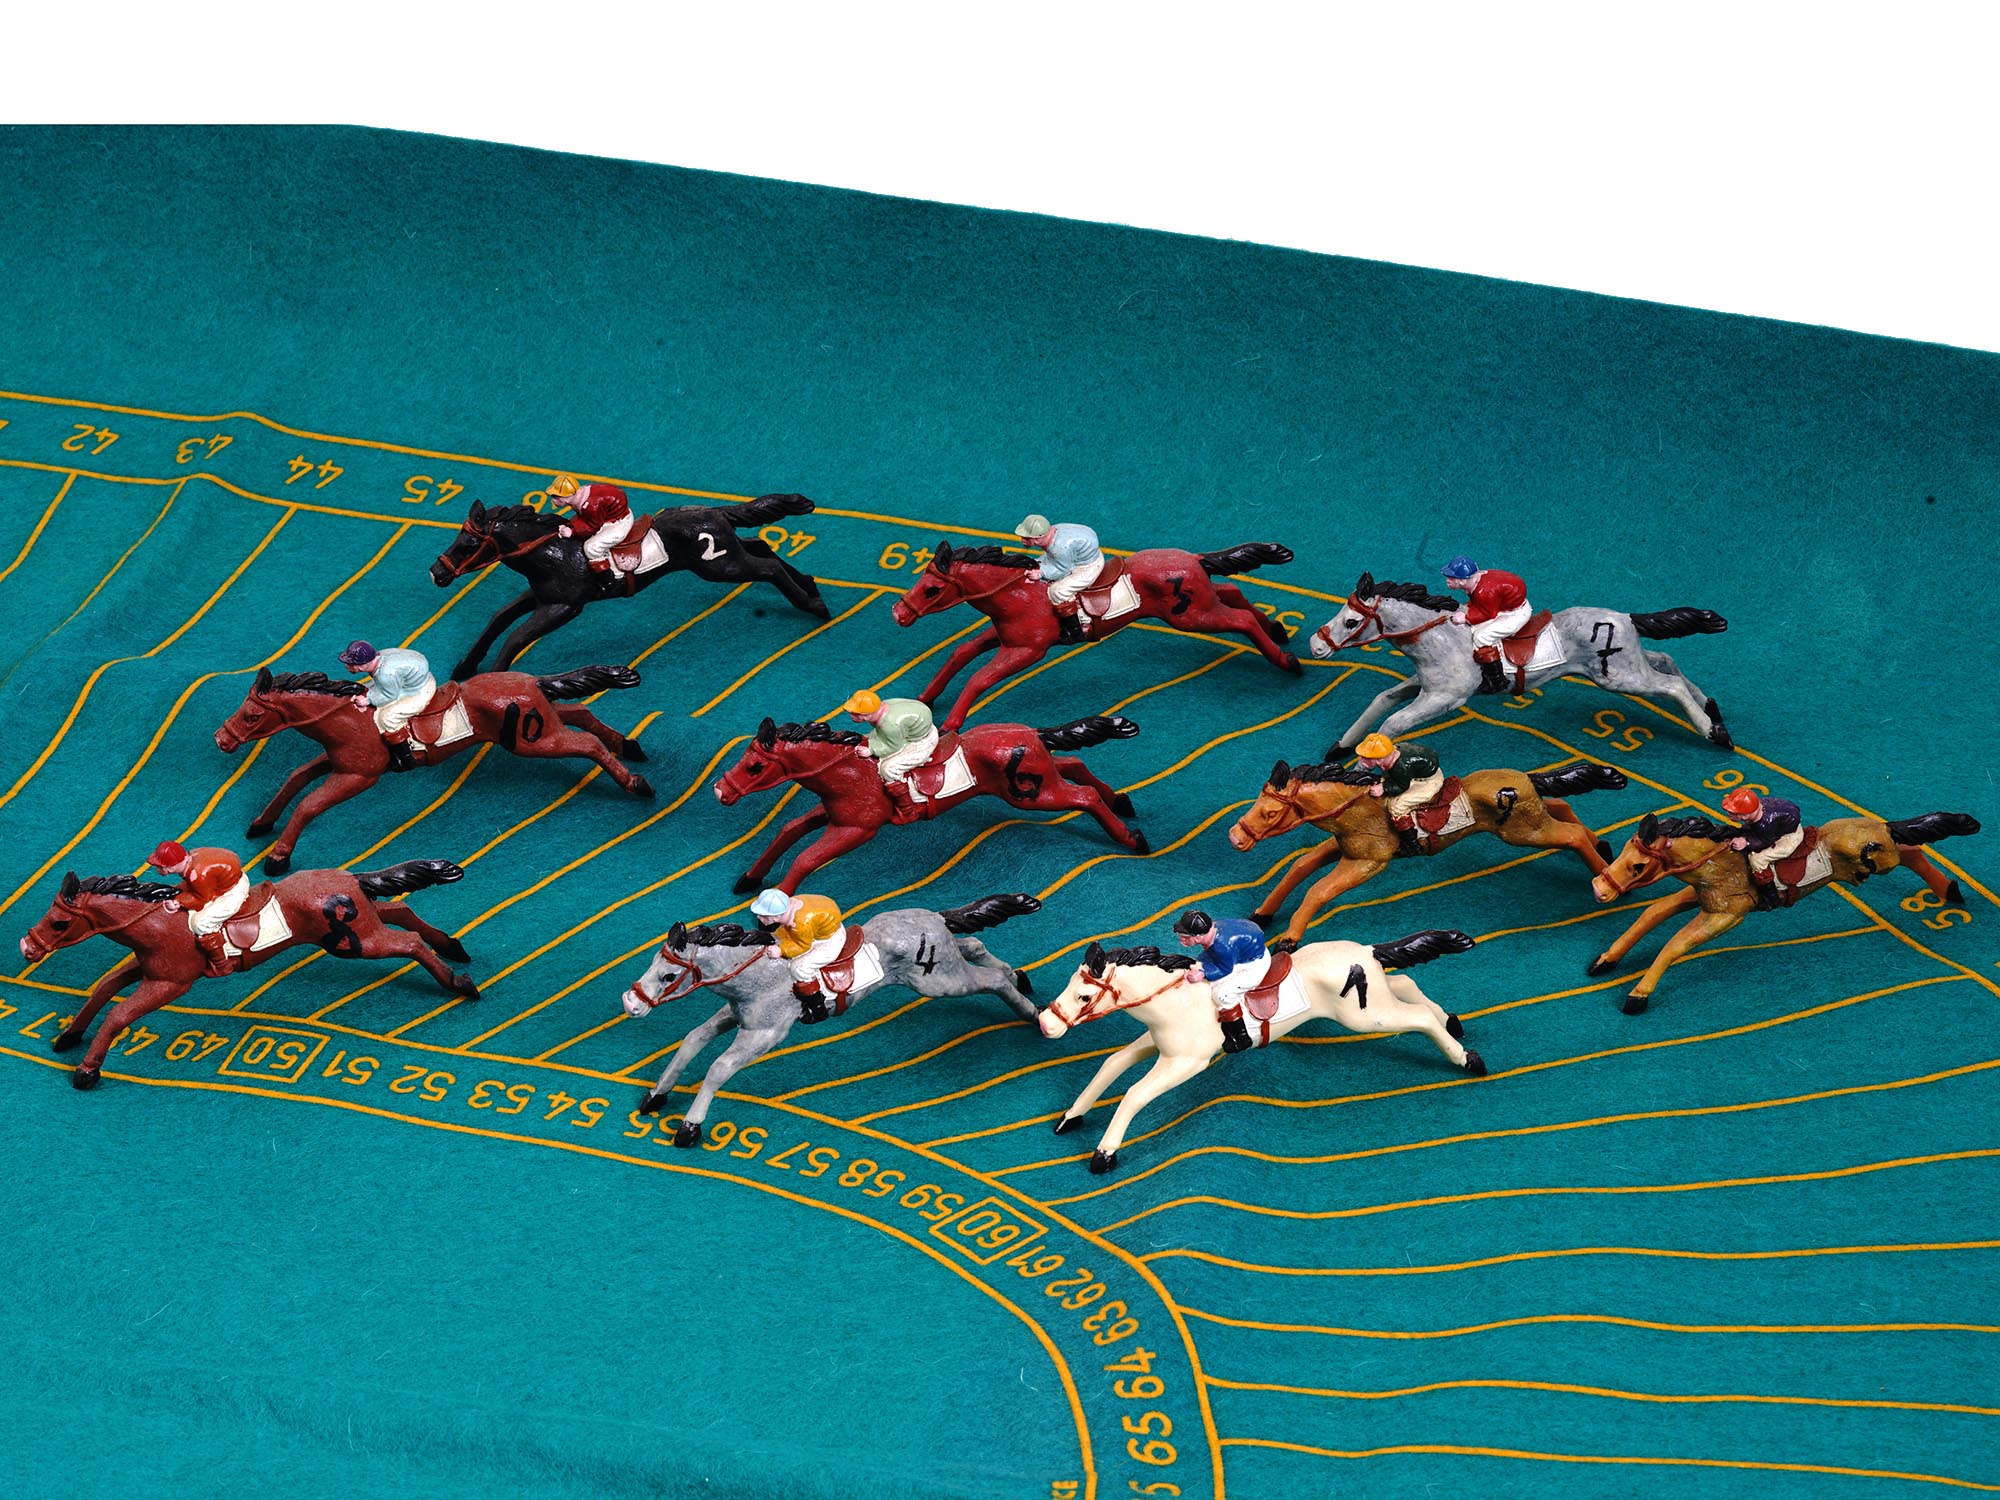 VINTAGE FRENCH BOULE HORSE ROULETTE PLAYING SET PIC-2